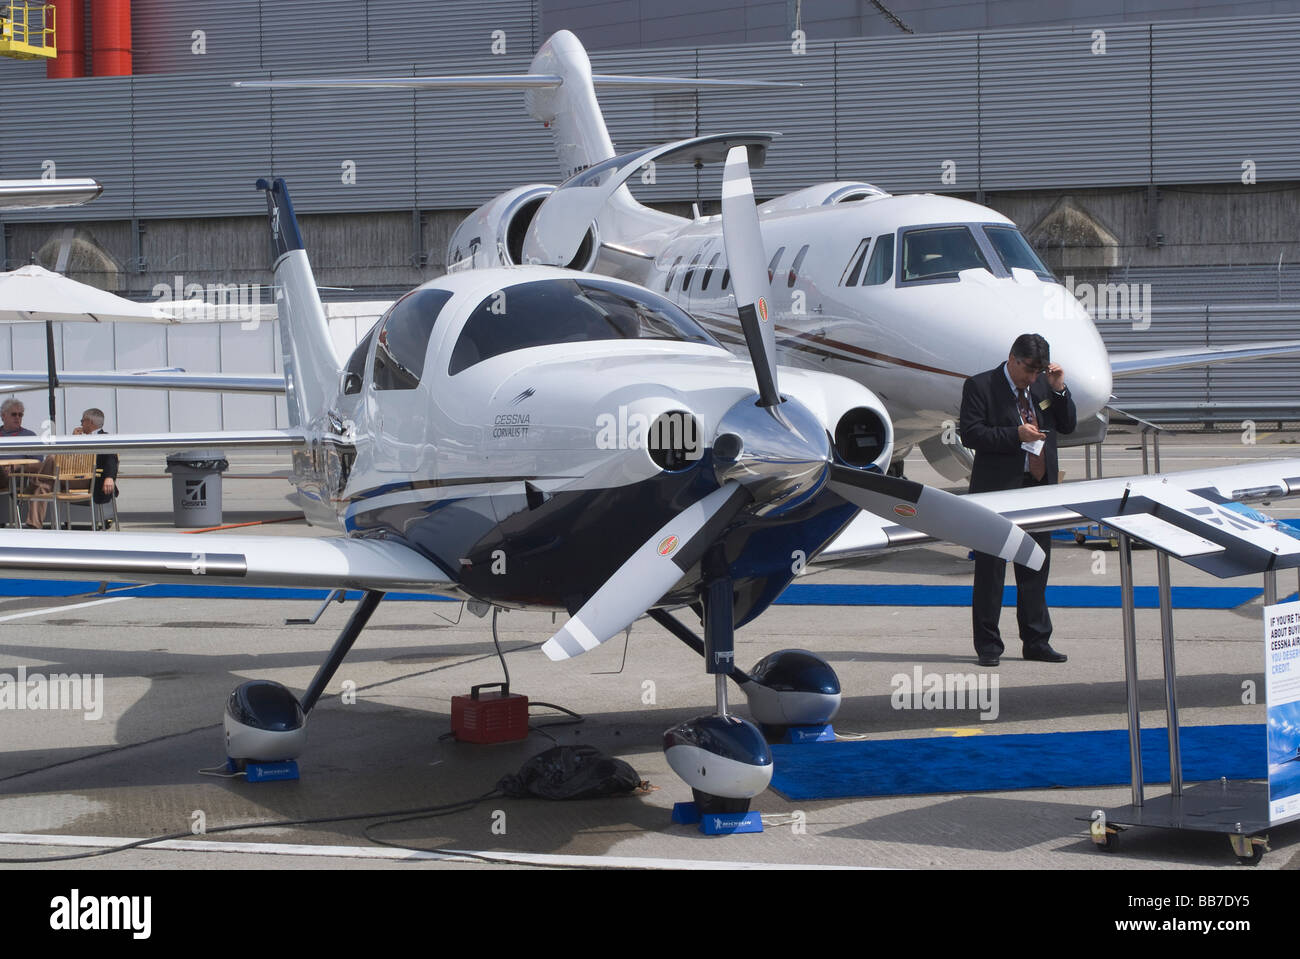 Cessna Corralis Turboprop N10427 Business Aircraft at EBACE Aircraft Trade Show at Geneva Airport Switzerland Geneve Suisse Stock Photo